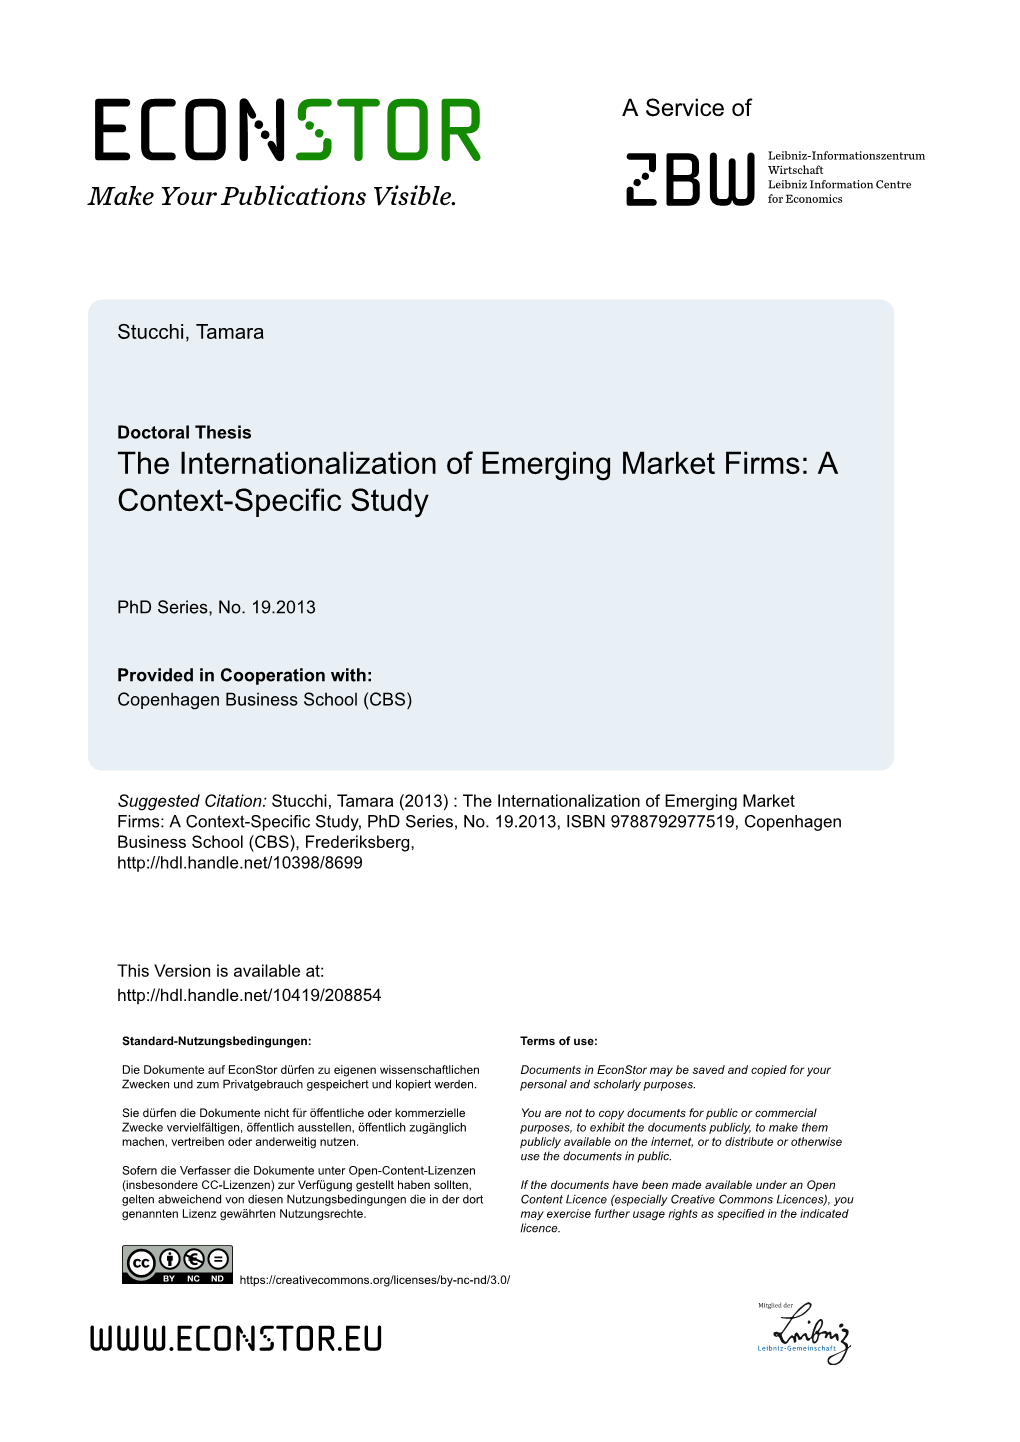 The Internationalization of Emerging Market Firms: a Context-Specific Study